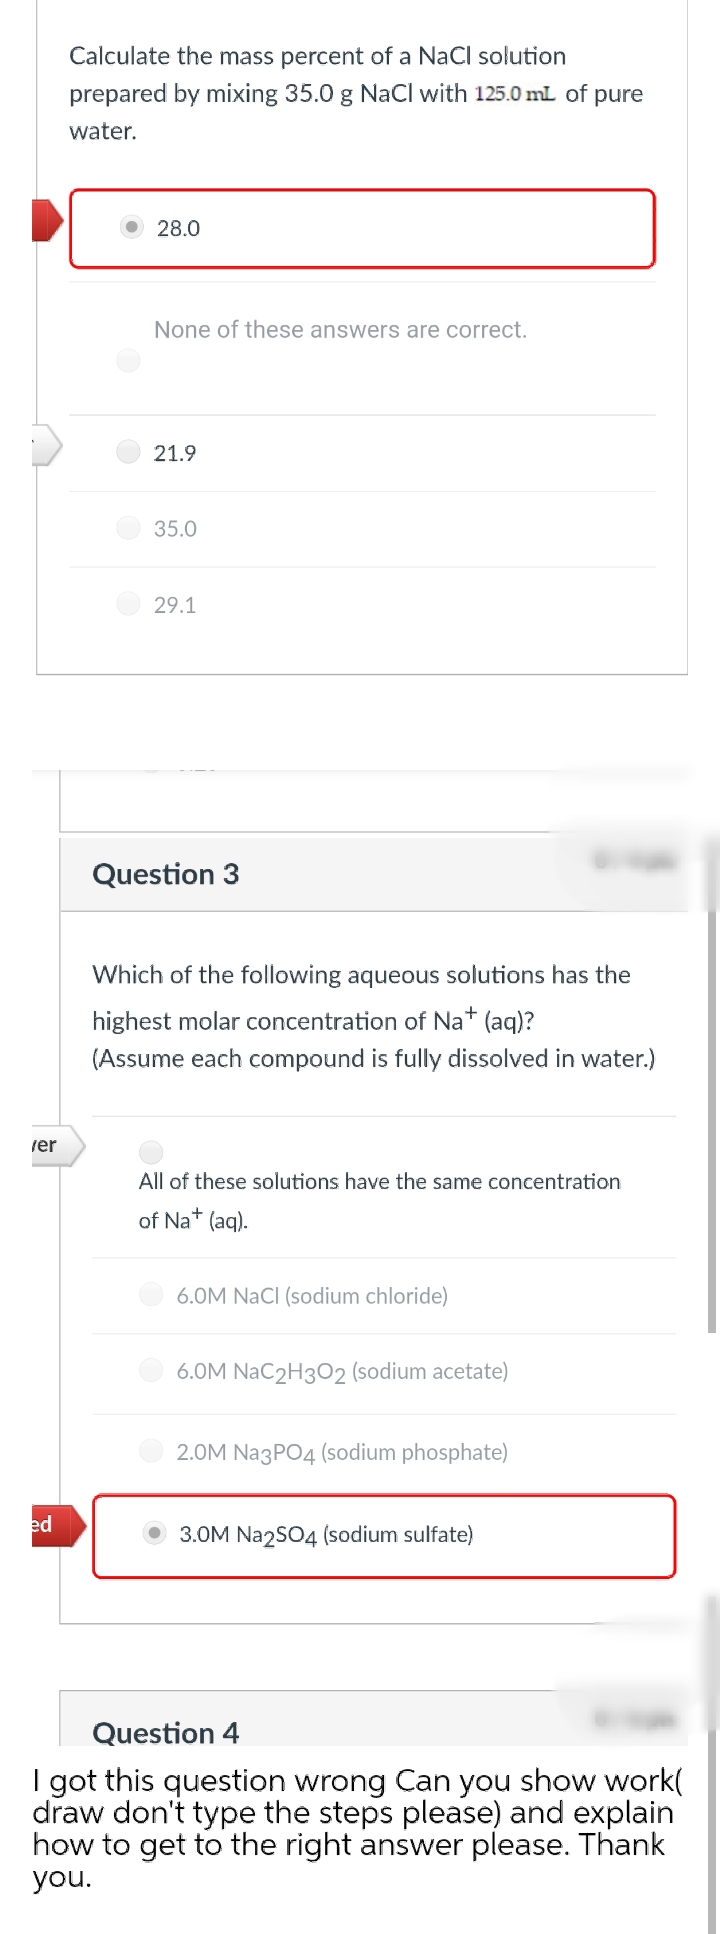 Calculate the mass percent of a NaCl solution
prepared by mixing 35.0 g NaCl with 125.0 mL of pure
water.
28.0
None of these answers are correct.
21.9
35.0
29.1
Question 3
Which of the following aqueous solutions has the
highest molar concentration of Na* (aq)?
(Assume each compound is fully dissolved in water.)
rer
All of these solutions have the same concentration
of Na+
(aq).
6.0M NaCI (sodium chloride)
6.OM NaC2H302 (sodium acetate)
2.0M Na3PO4 (sodium phosphate)
ed
3.0M Na2S04 (sodium sulfate)
Question 4
I got this question wrong Can you show work(
draw don't type the steps please) and explain
how to get to the right answer please. Thank
you.
